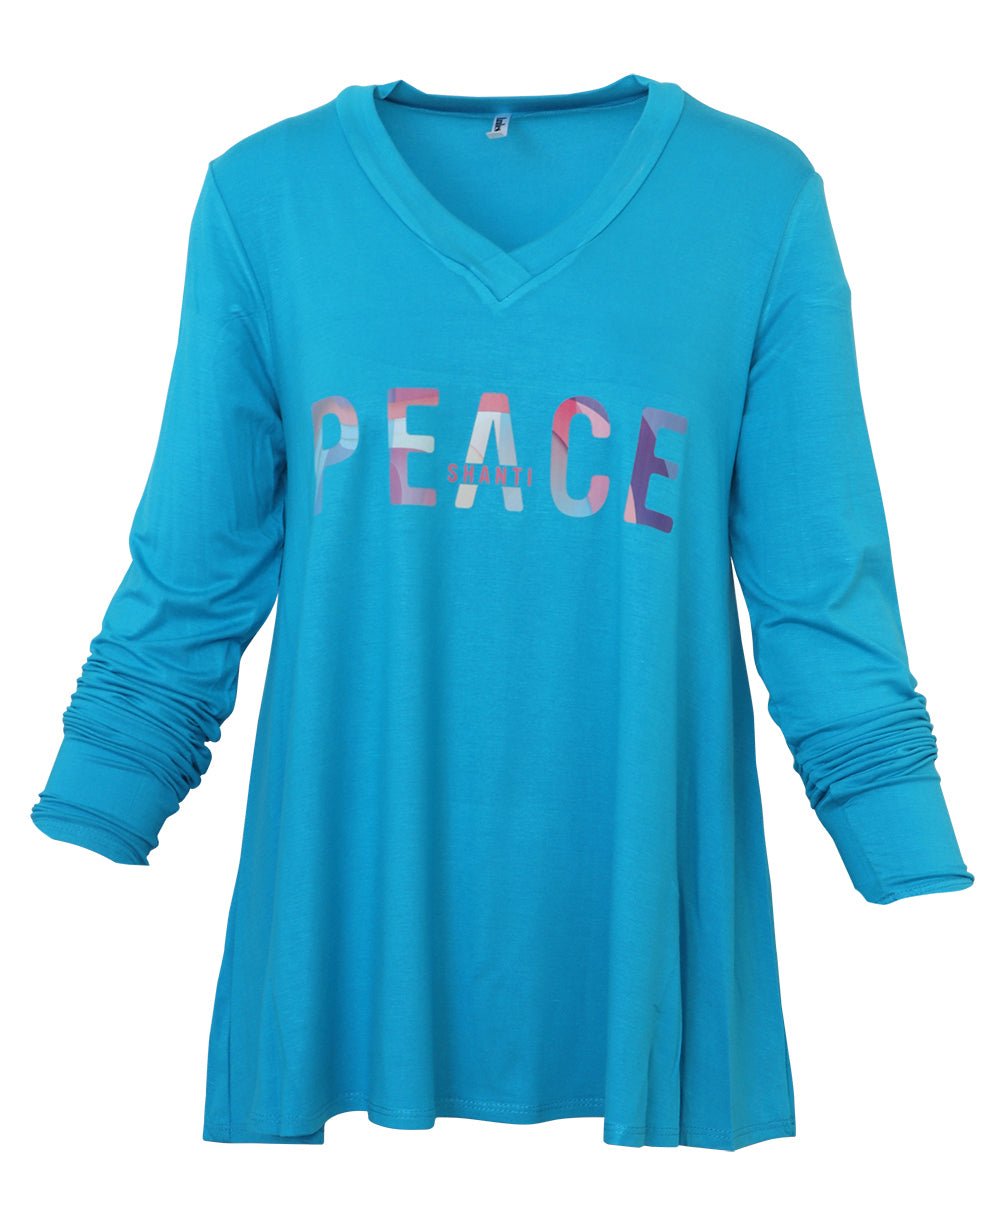 Tranquility Tunic Top with Peace, Shanti Inspirational Design - Shirts & Tops S